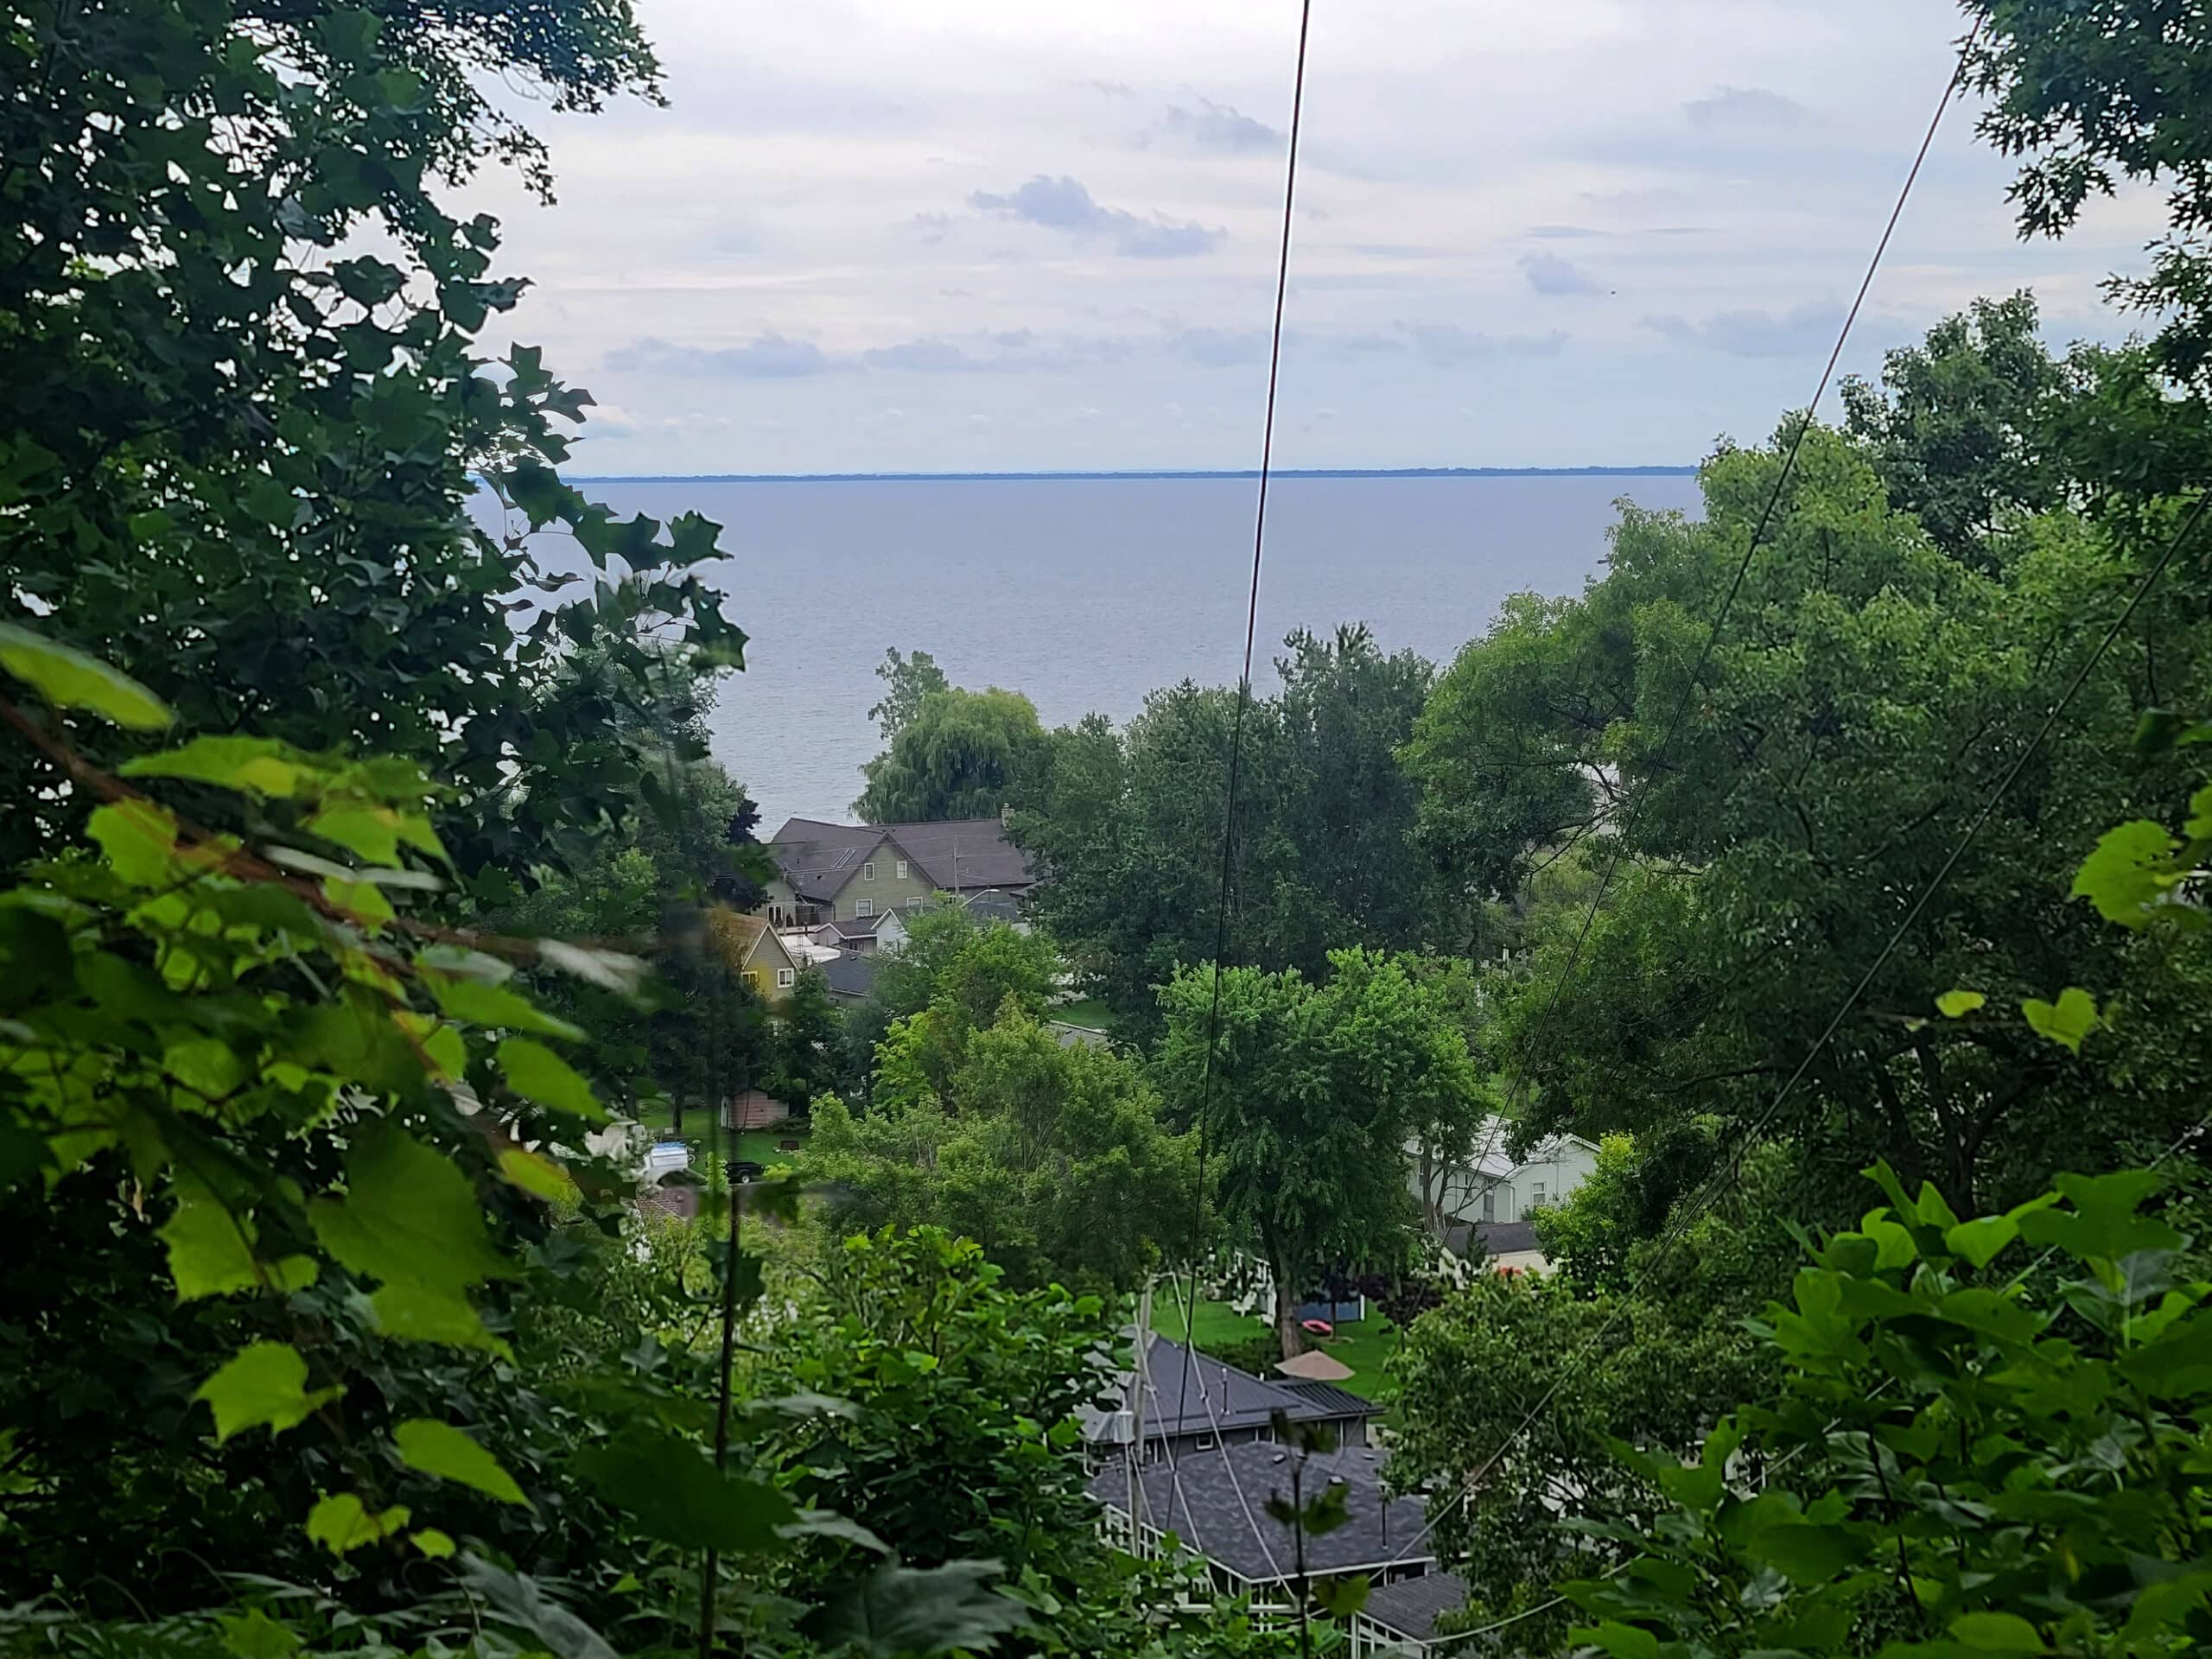 A fairly meh view of Lake erie in the distance, with tree tops and houses in the foreground.